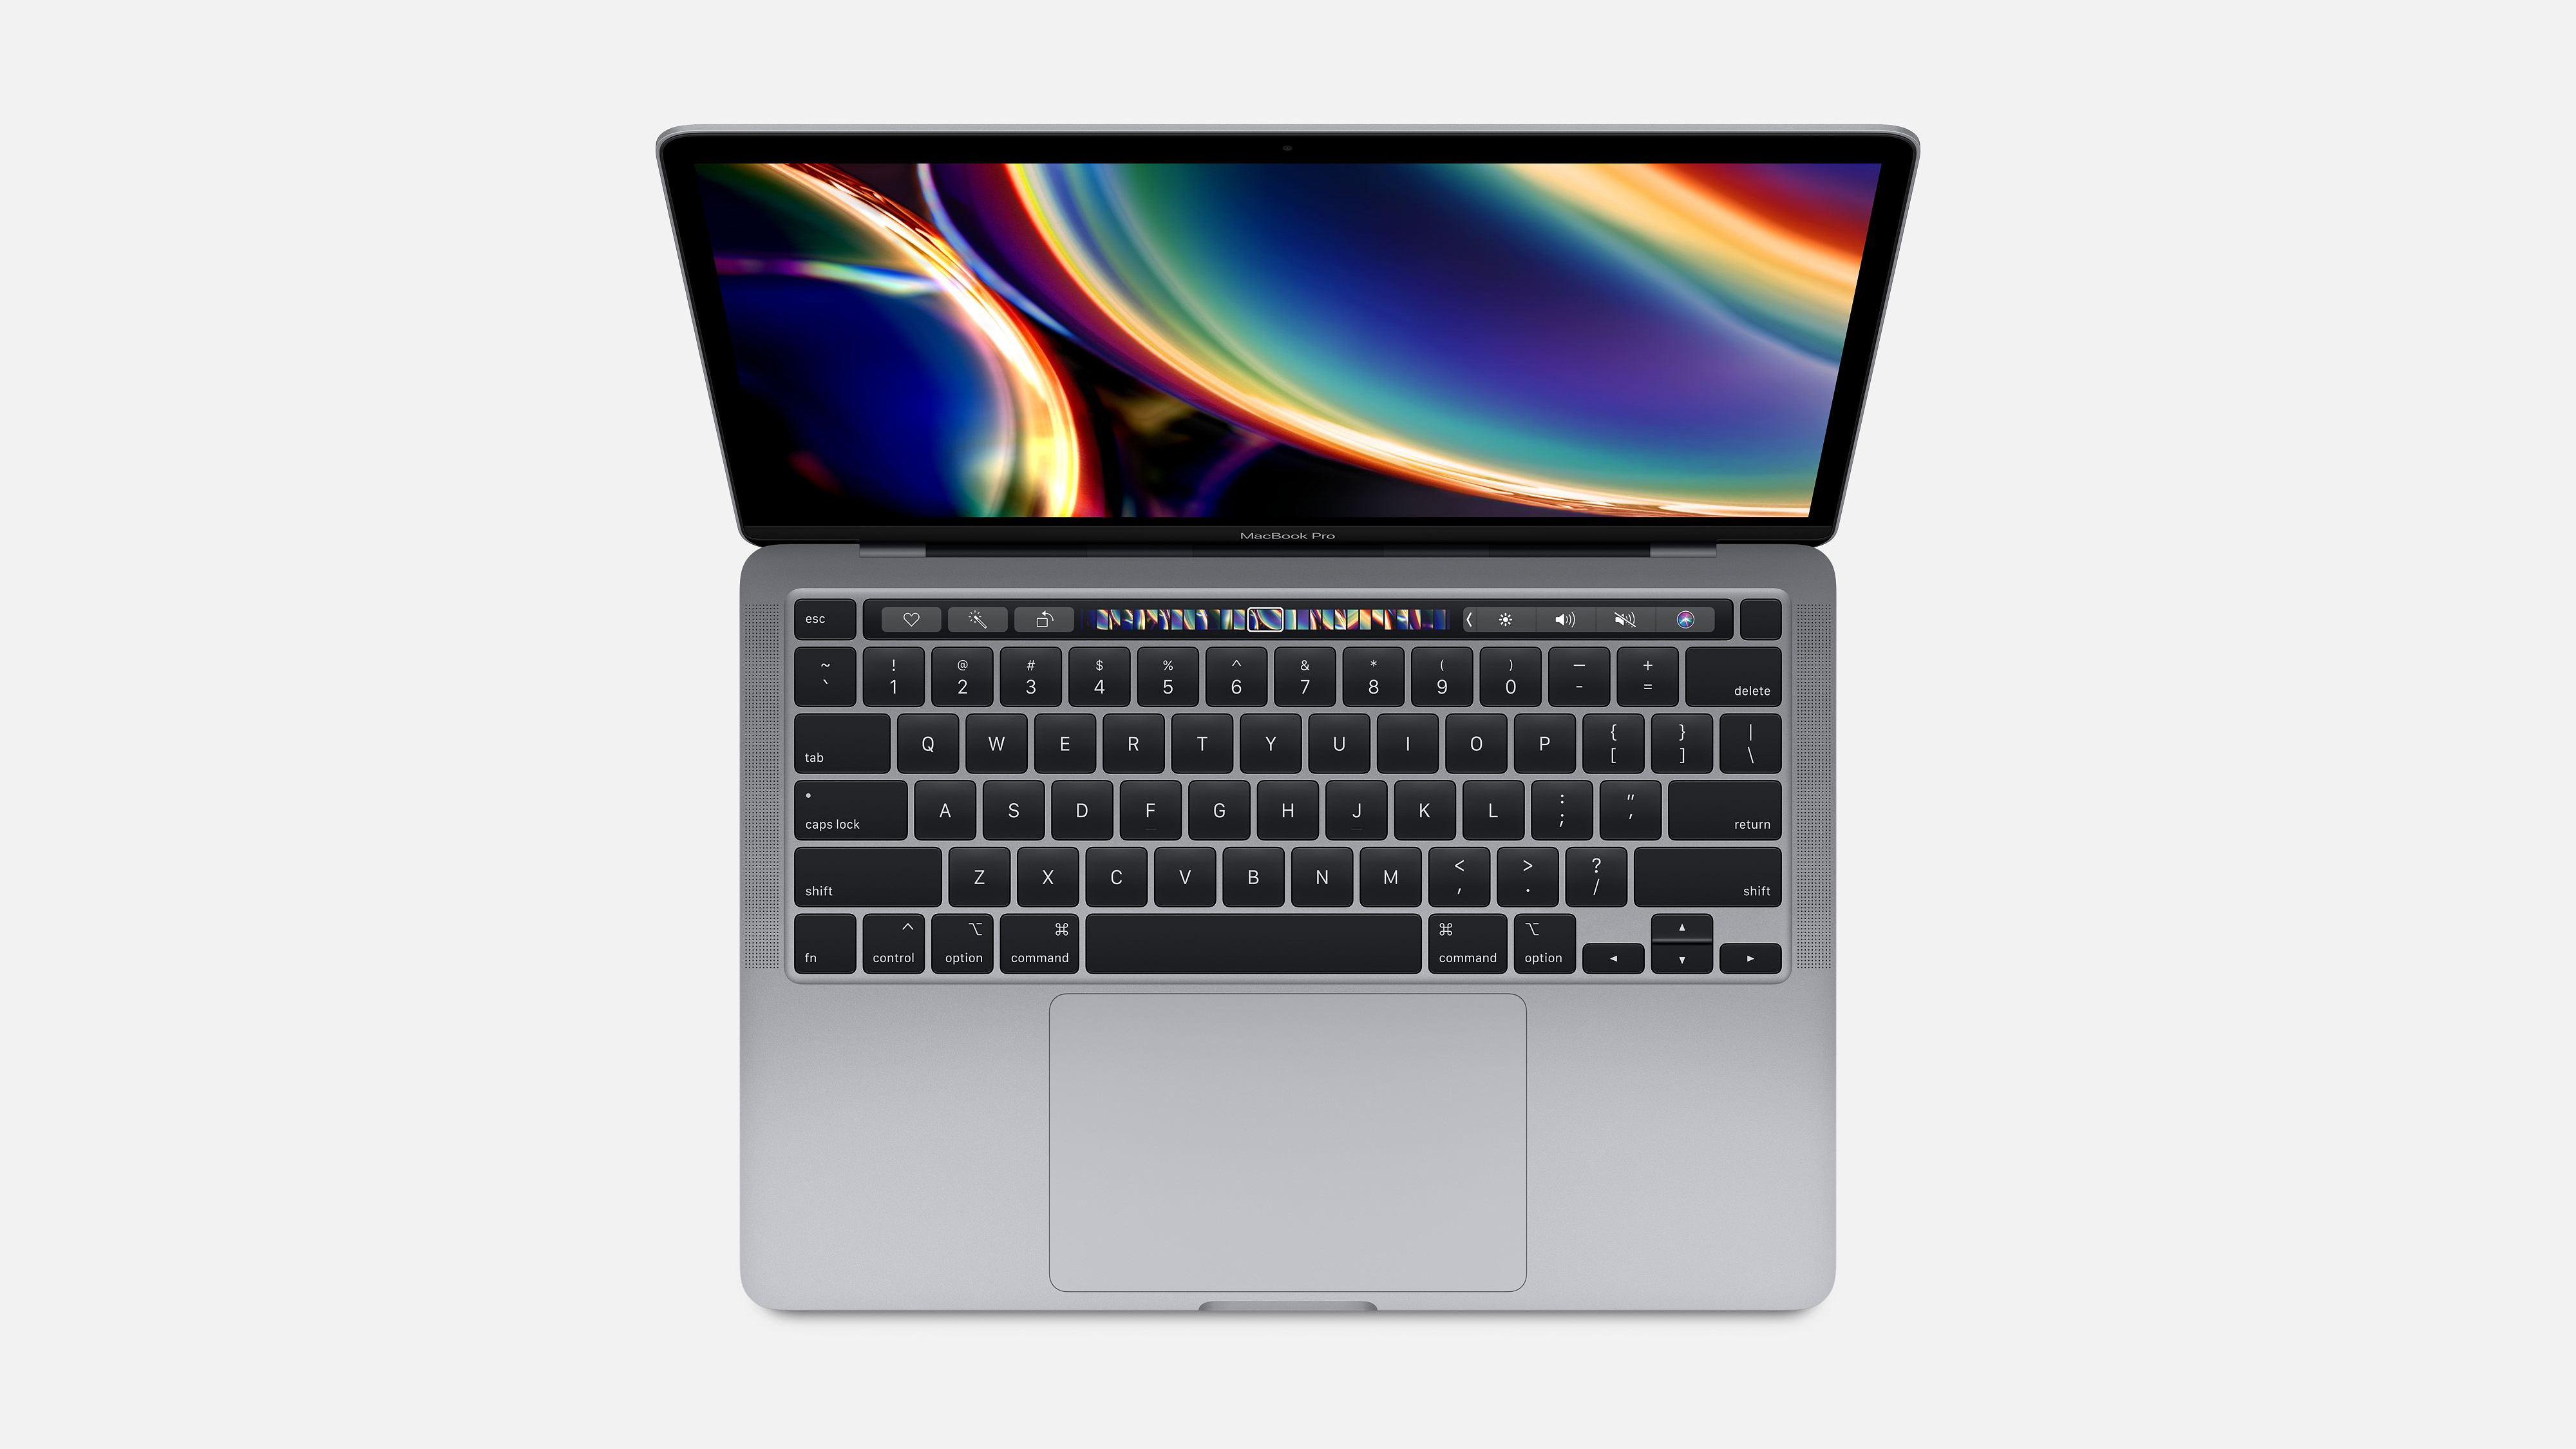 The MacBook Pro (13-inch, 2020) is the best MacBook for college students.